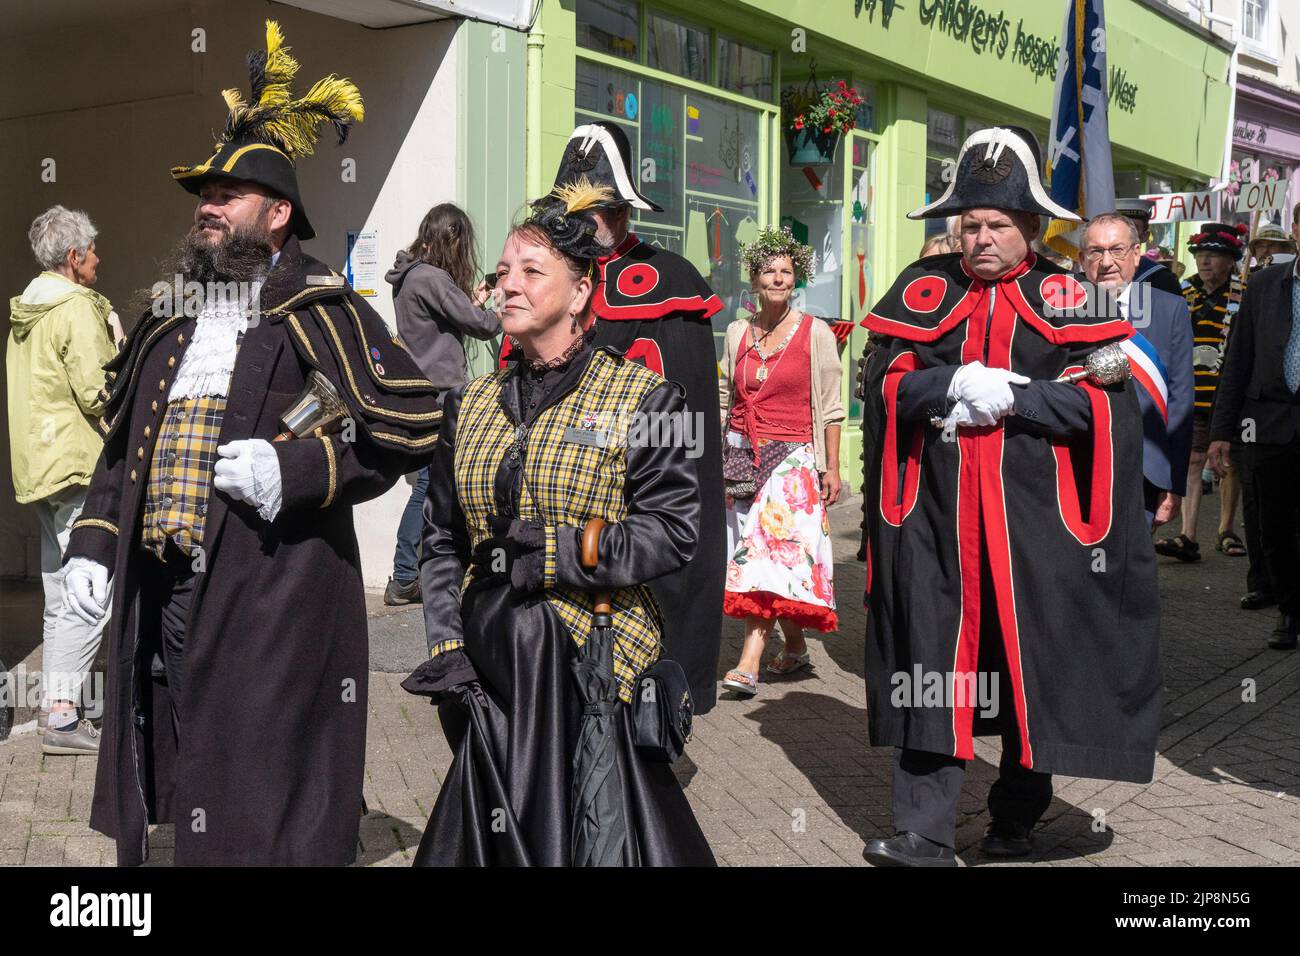 Philip Northcott Town Crier accompanied by his wife Rose Northcott leading the Civic Parade during Mazey Day Golowan Festival  in Penzance in Cornwall Stock Photo